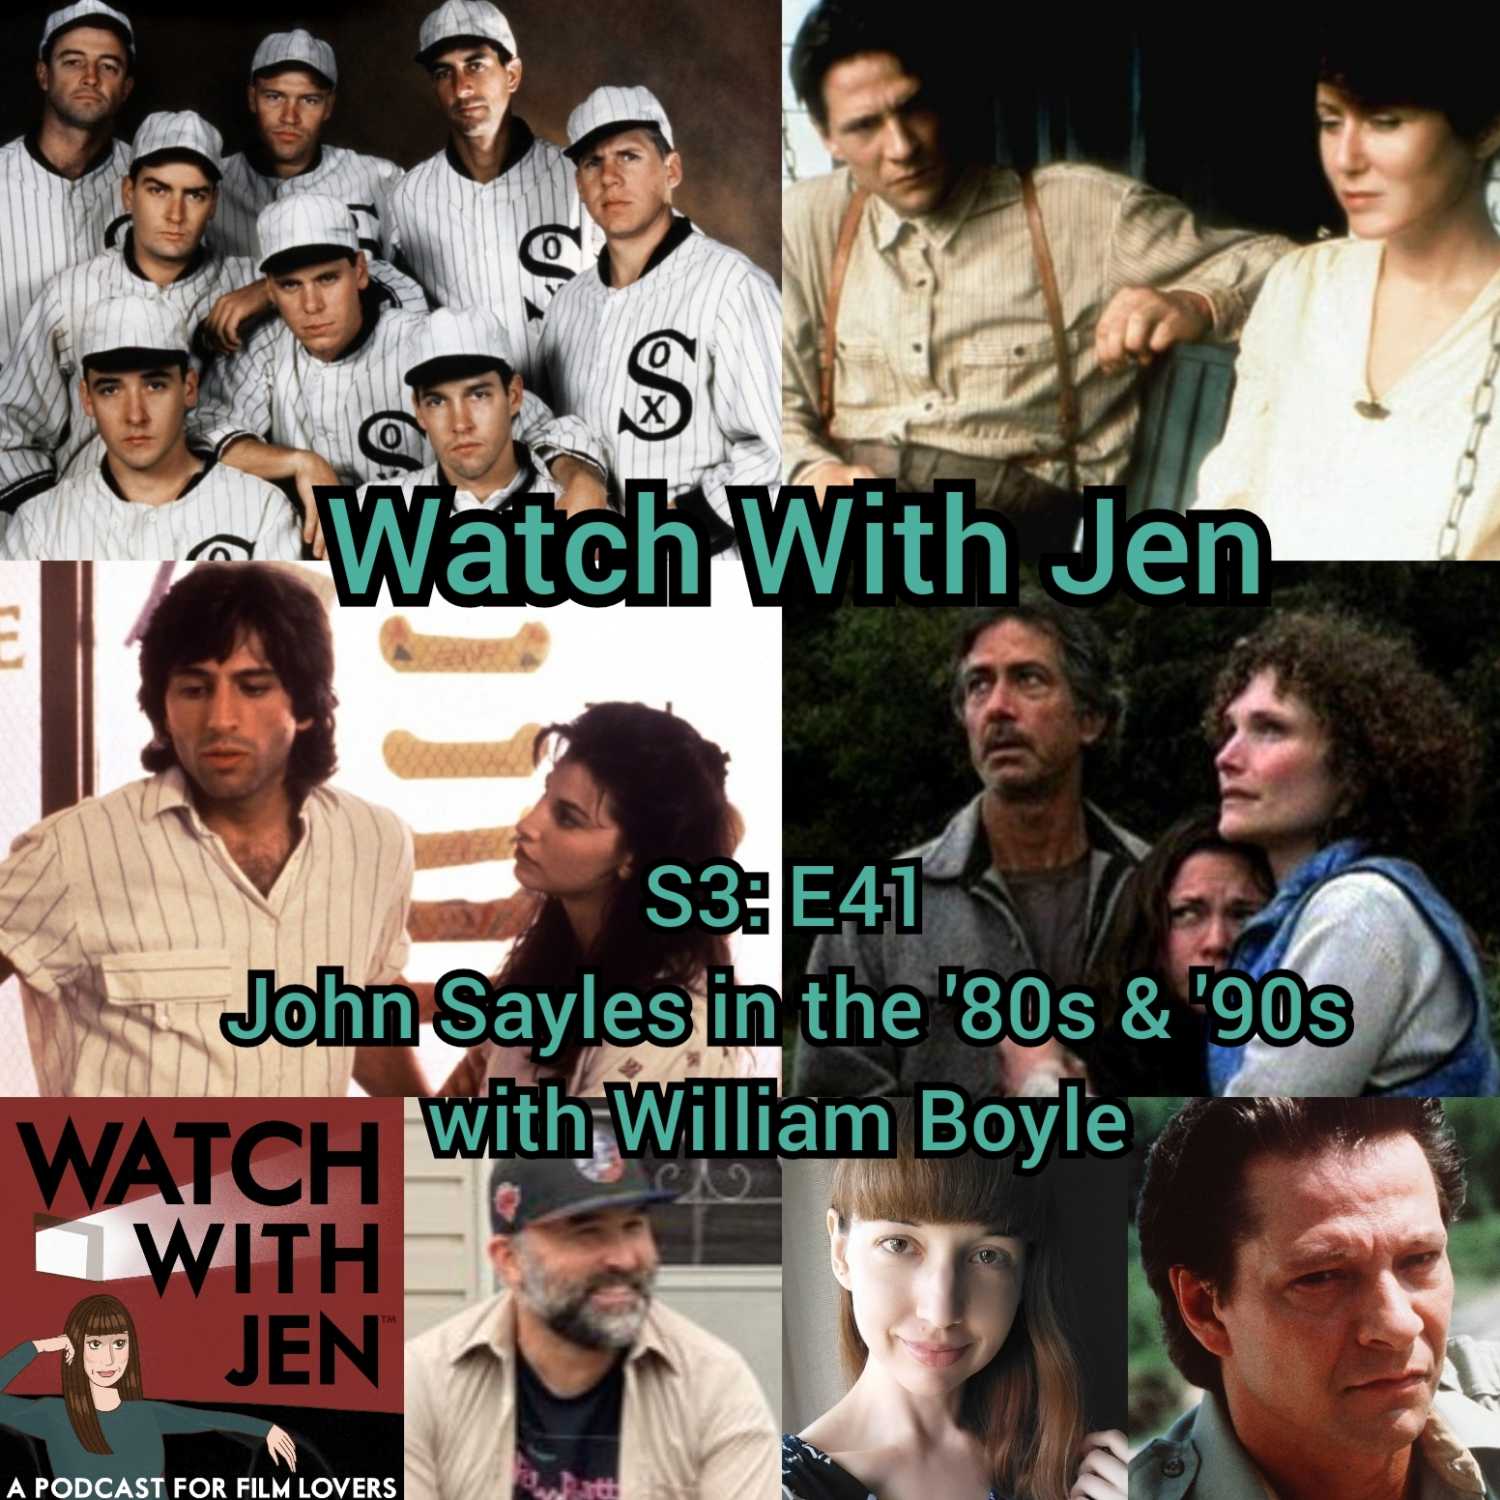 Watch With Jen - S3: E41 - John Sayles in the ’80s & ’90s with William Boyle